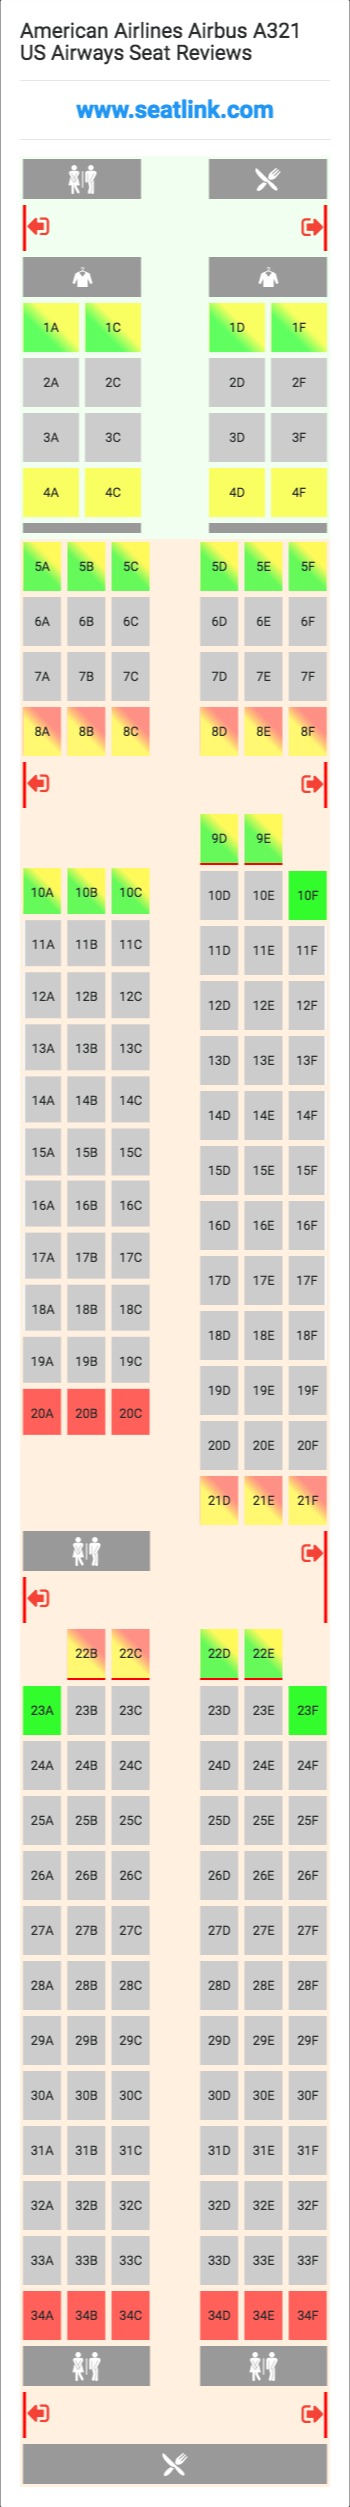 American Airlines Airbus A321 US Airways (321) Seat Map